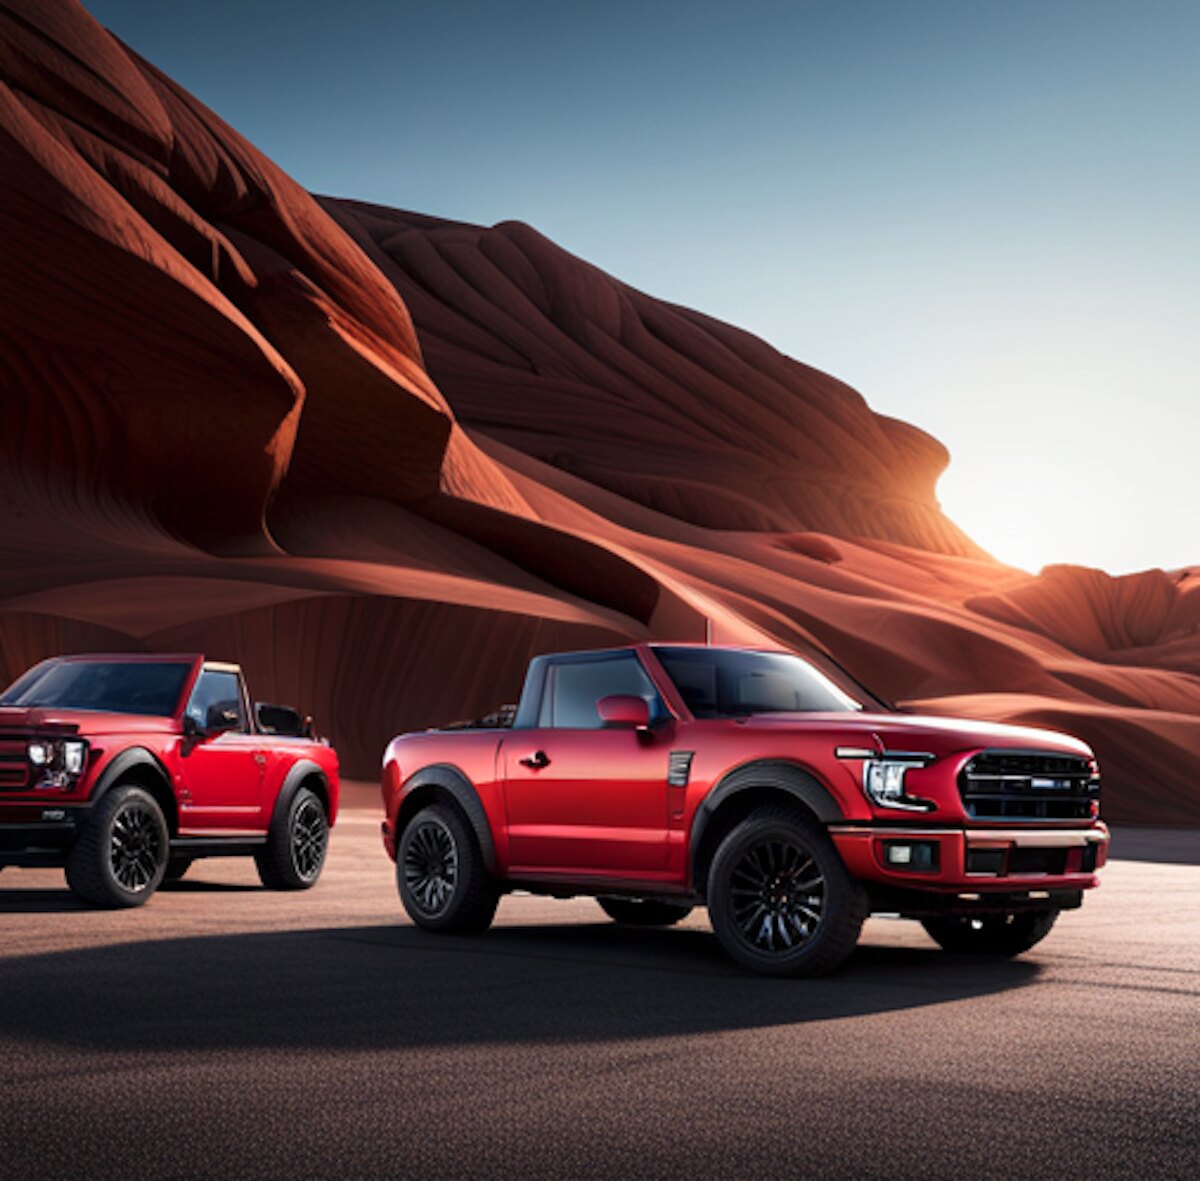 A rendering of two red Ford Bronco convertibles sitting in the desert.